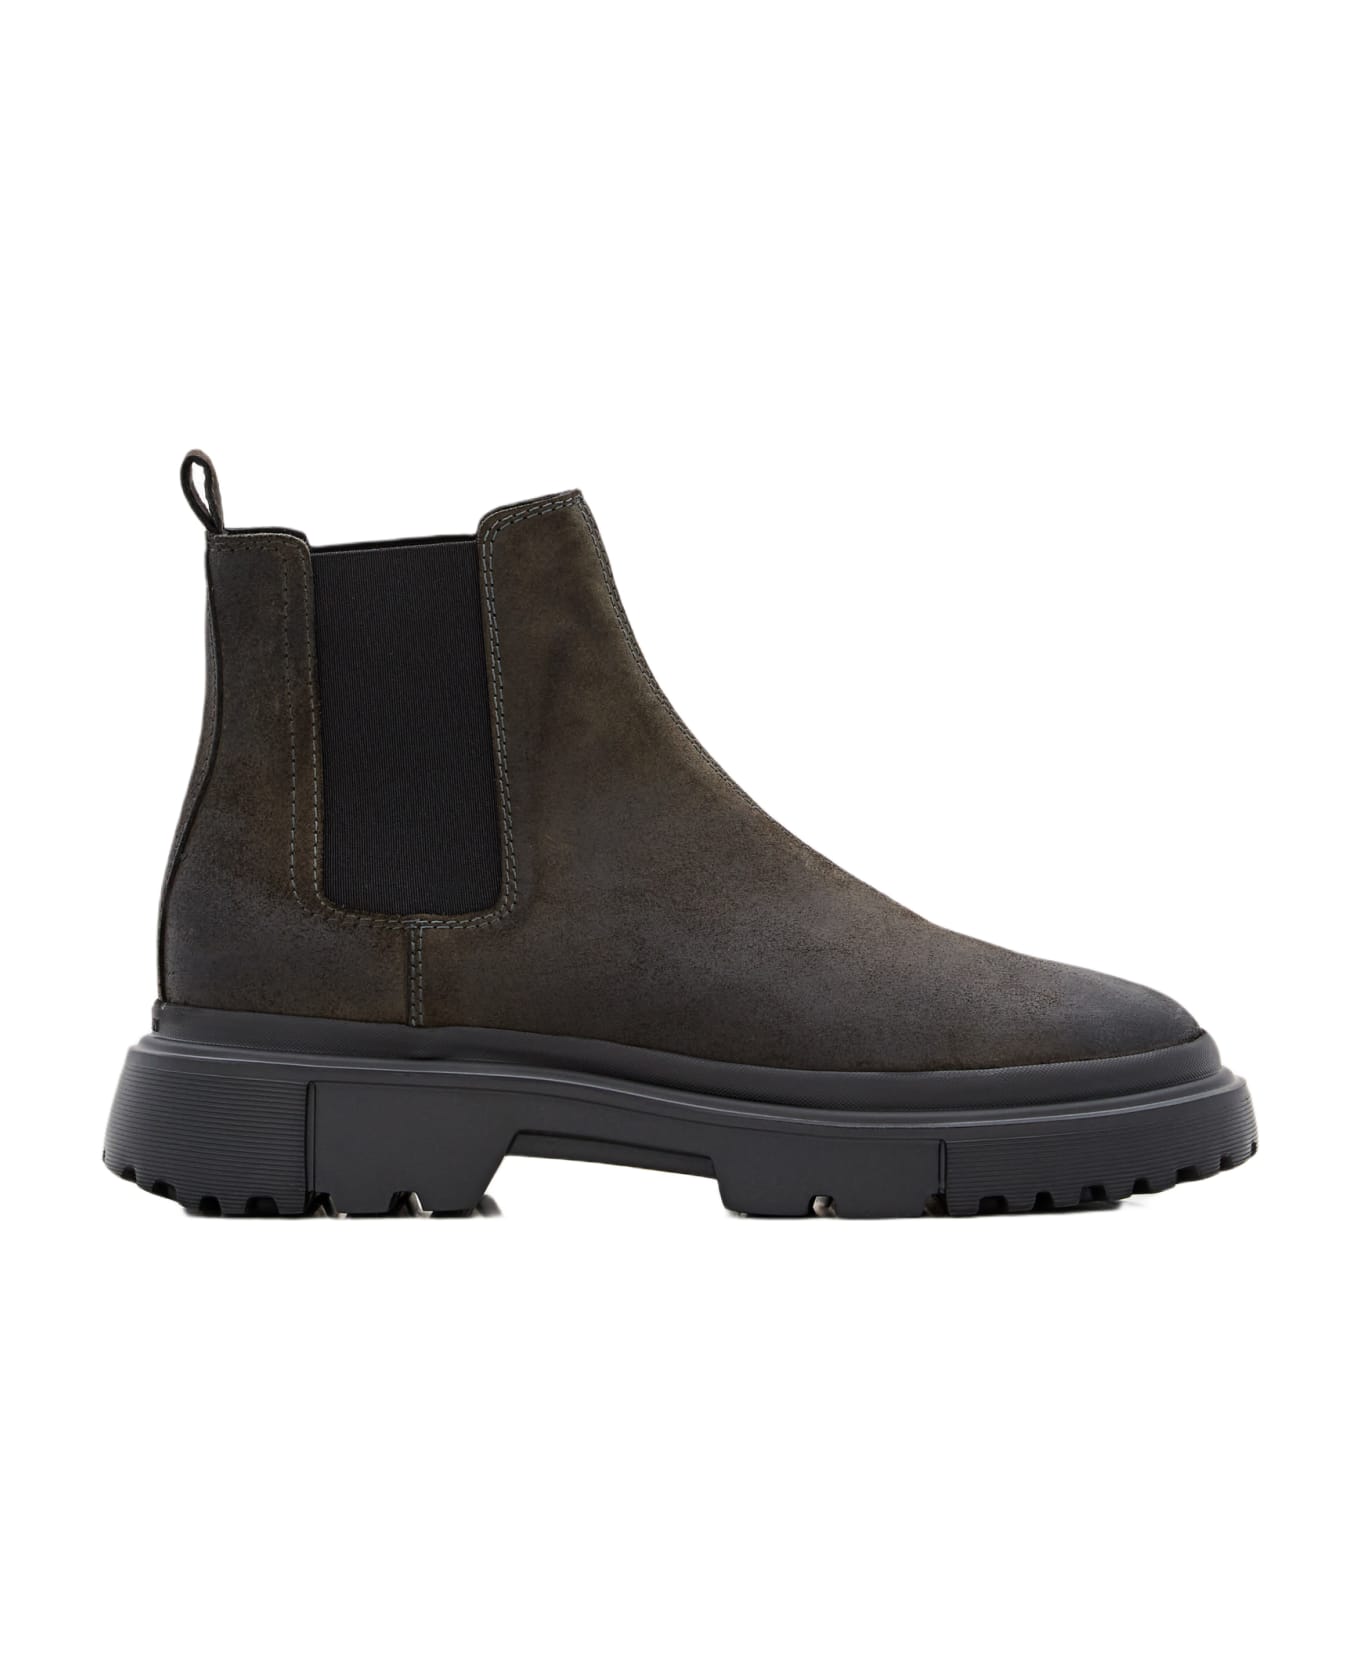 Hogan H629 Chelsea Ankle Boots - ANTRACITE ブーツ